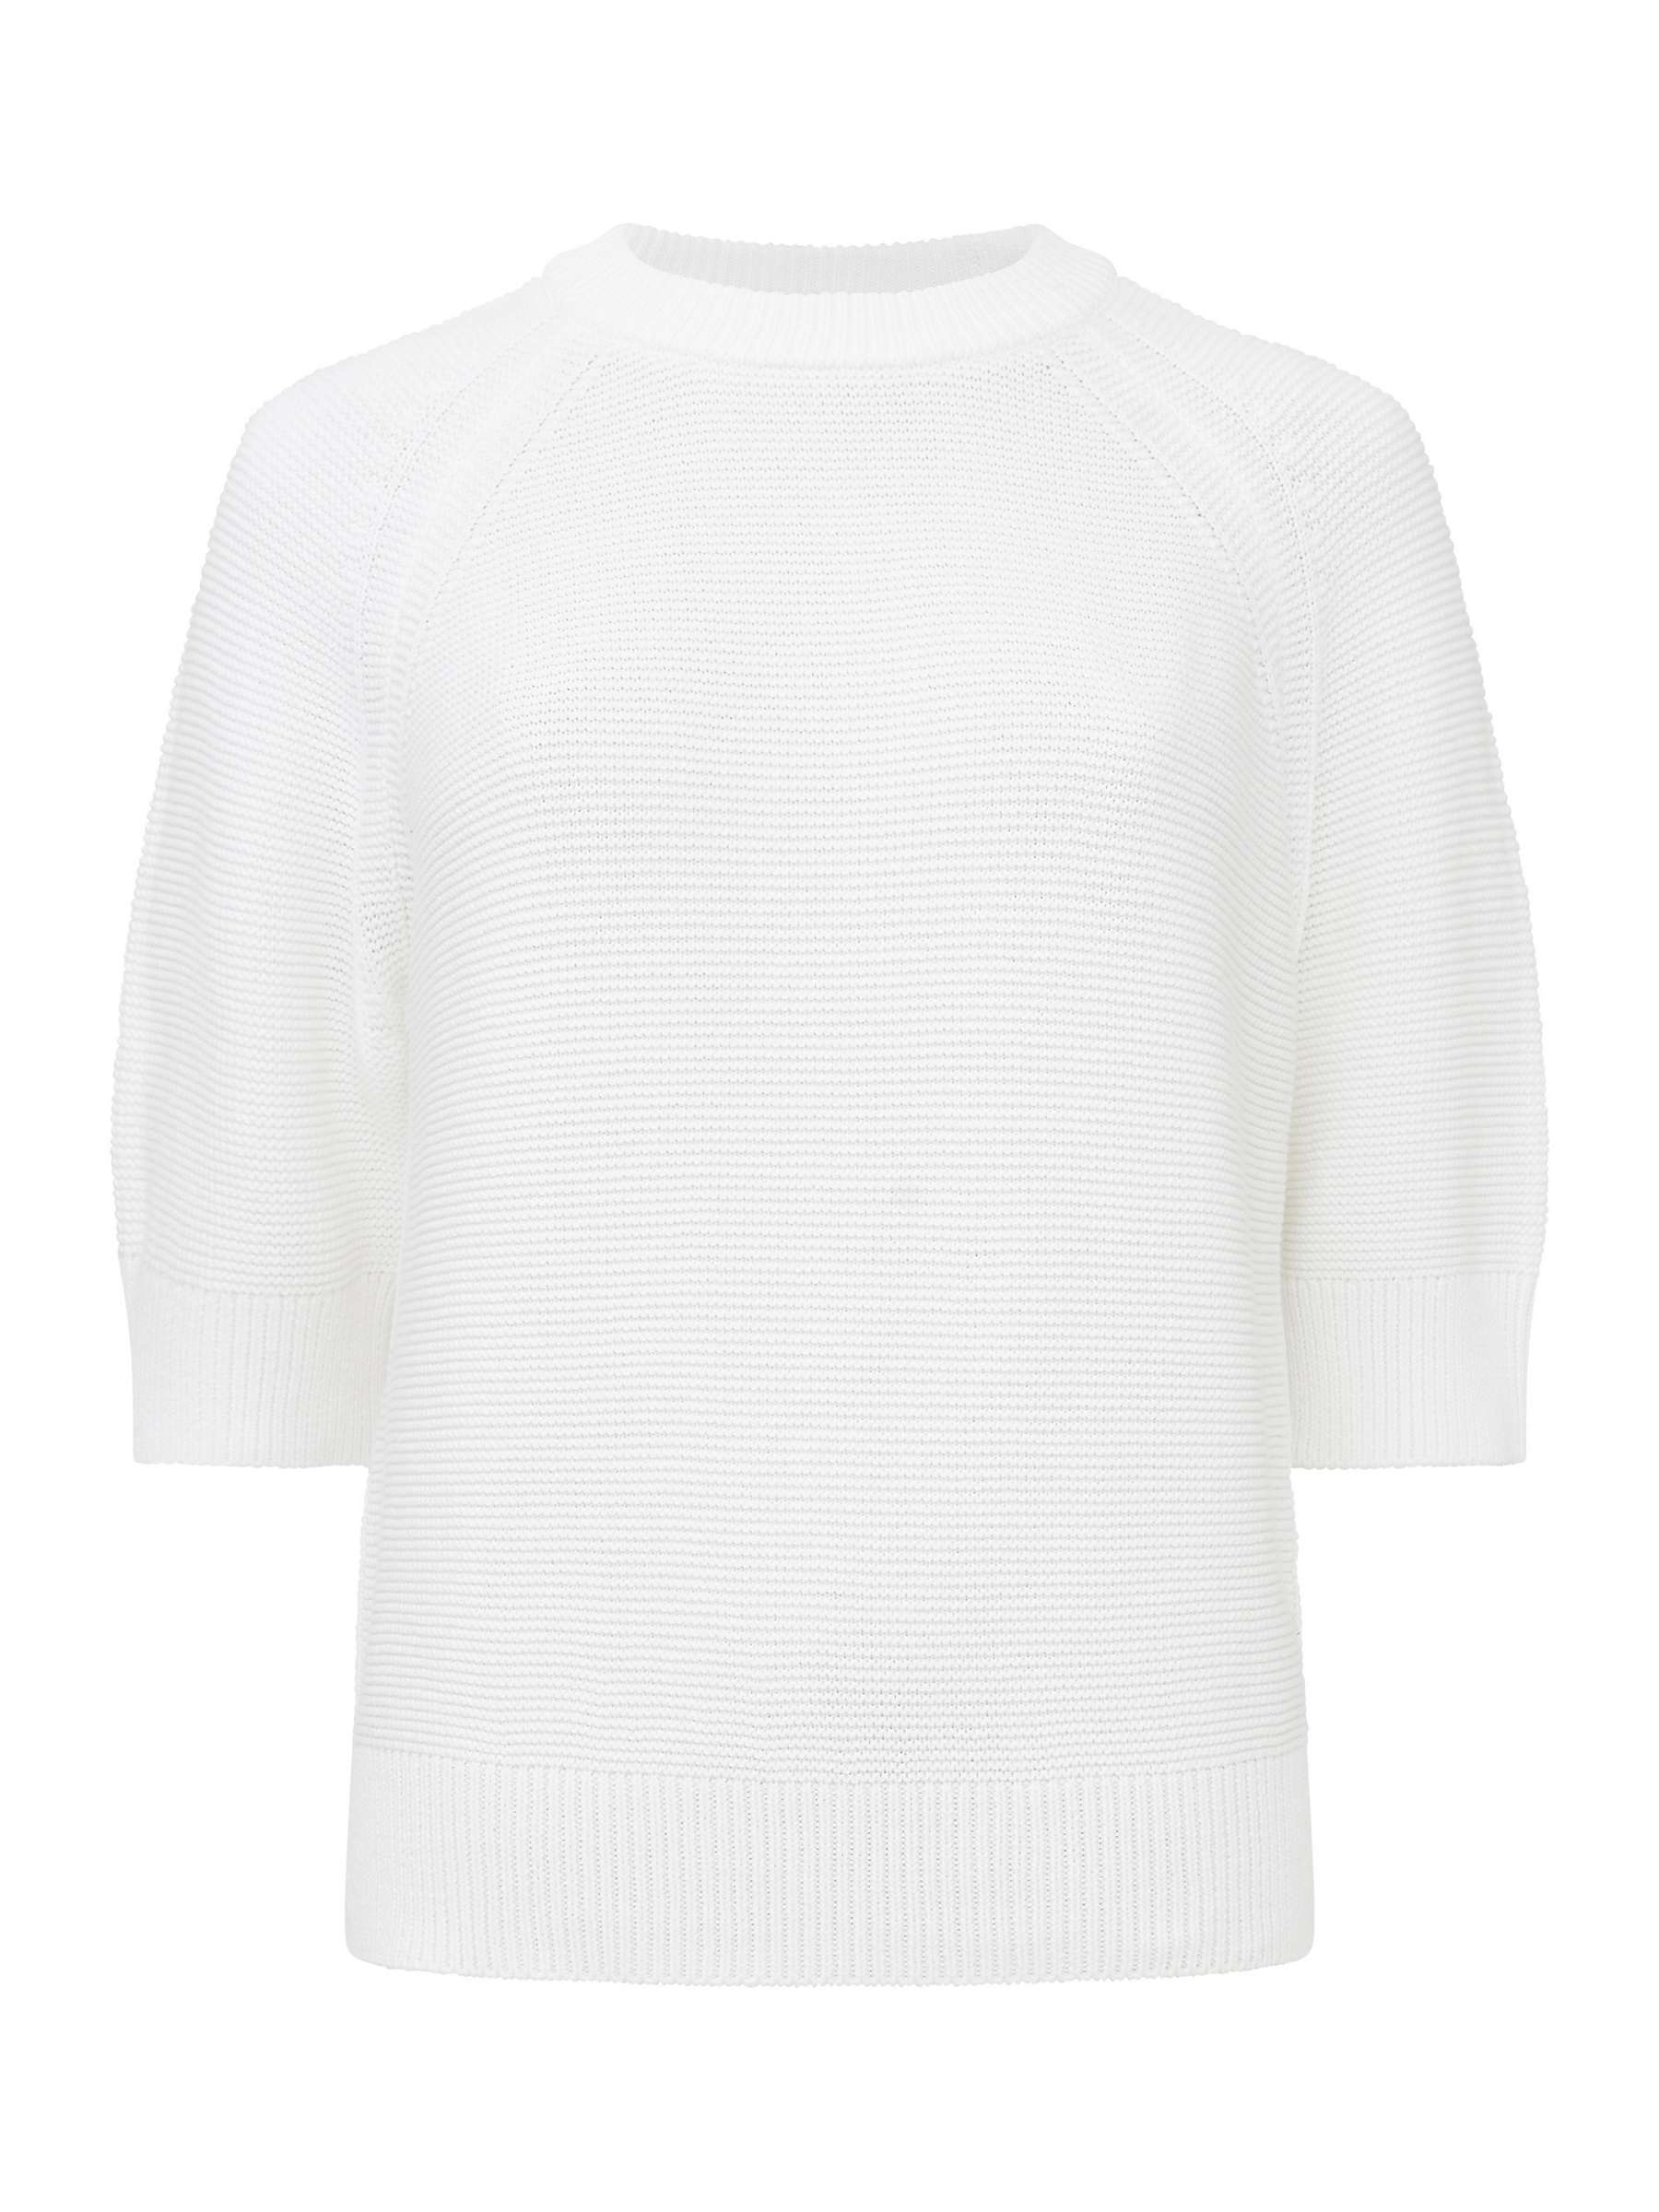 Buy French Connection Lily Mozart Elbow Sleeve Jumper Online at johnlewis.com